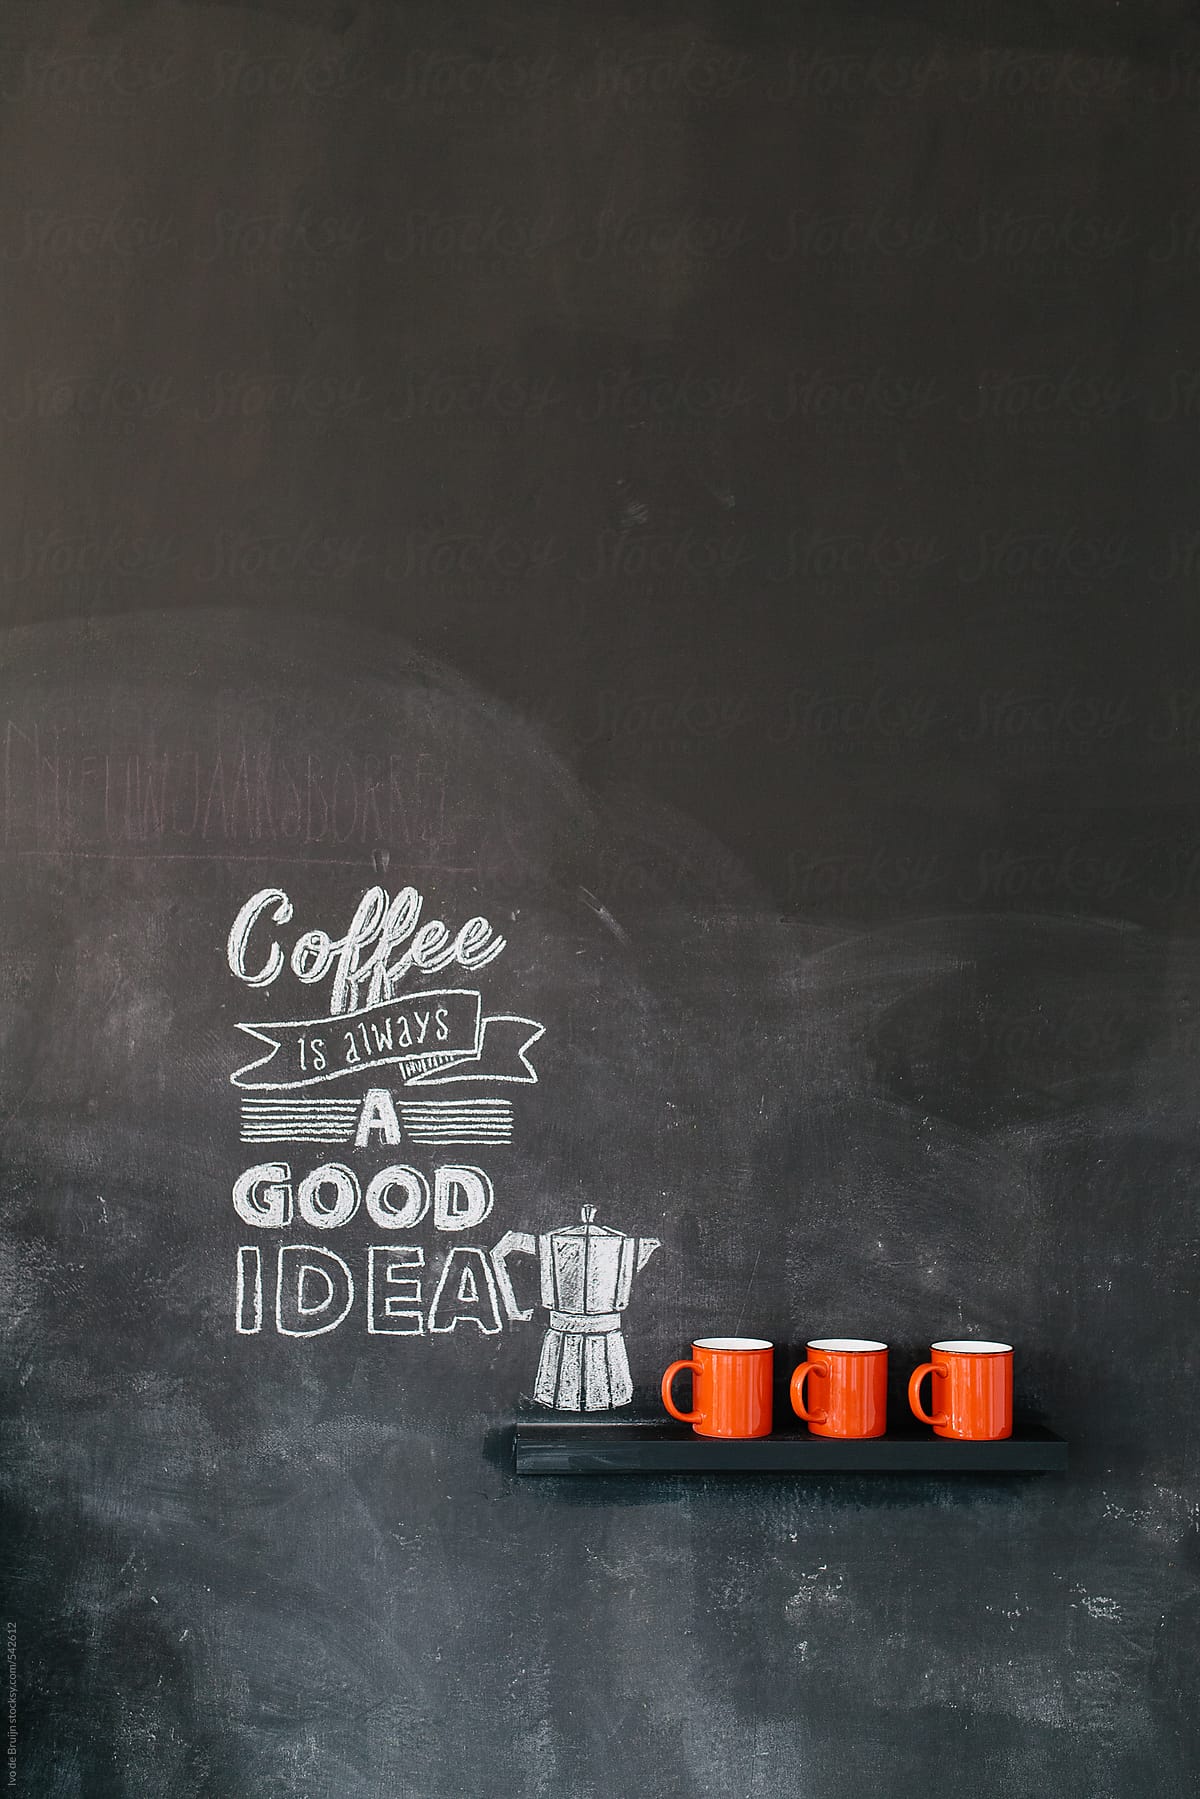 'Coffee is always a good idea' quote written on a blackboard, with red cups next to it